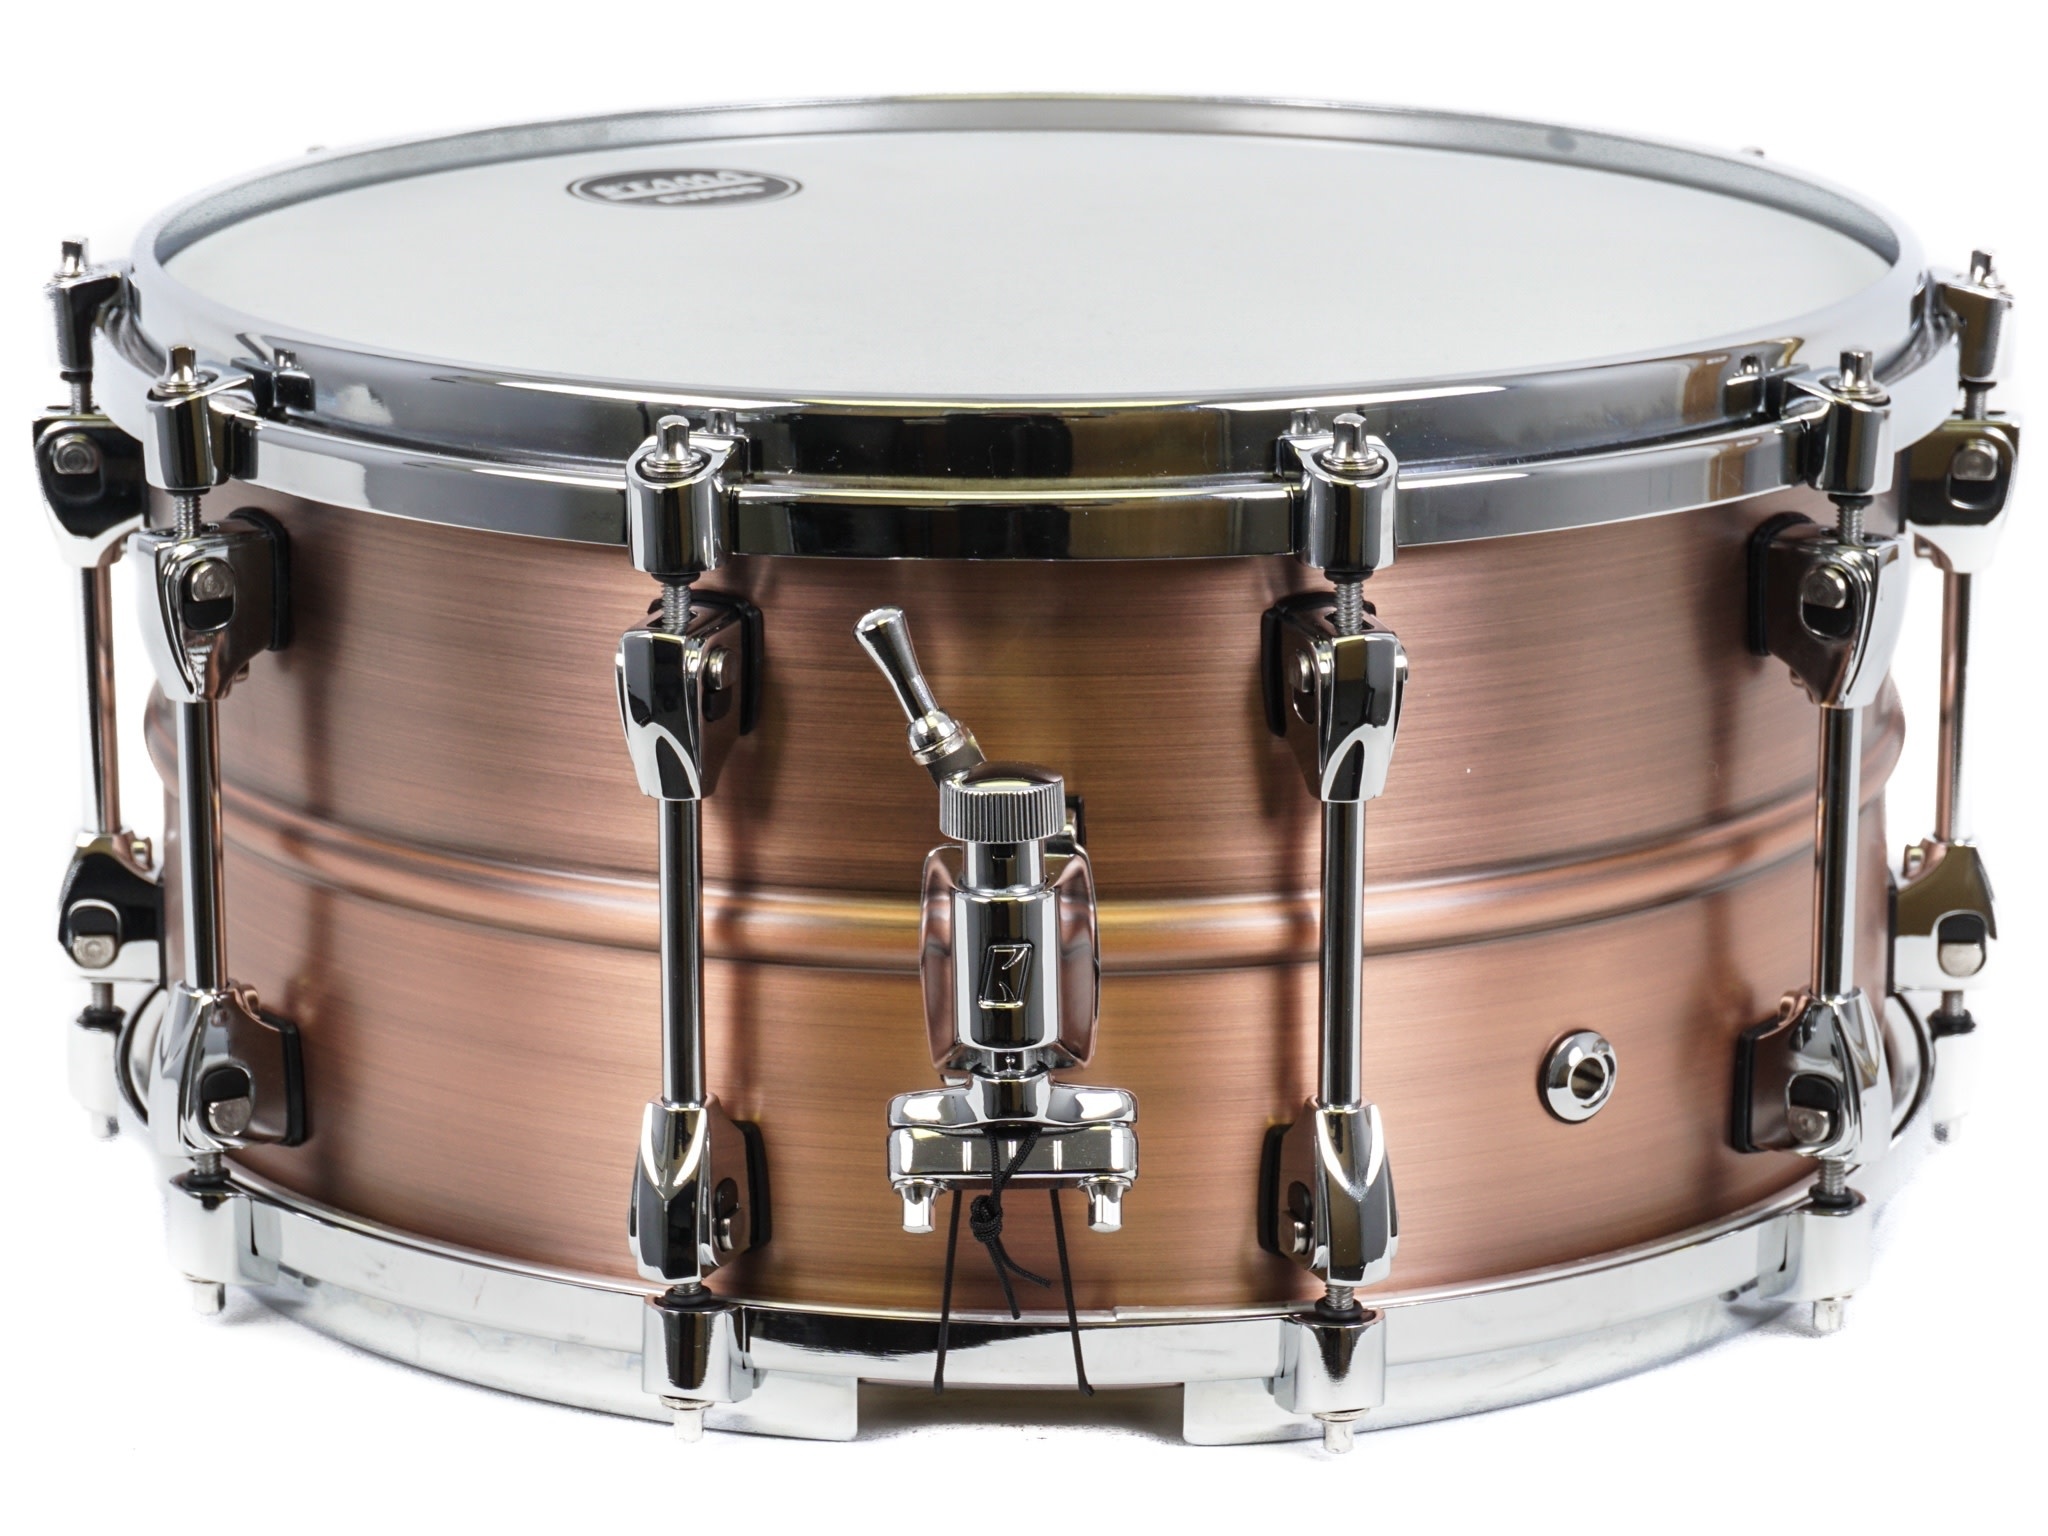 Tama Starphonic Copper Snare Drum 14" x 7" | Graham Russell Drums